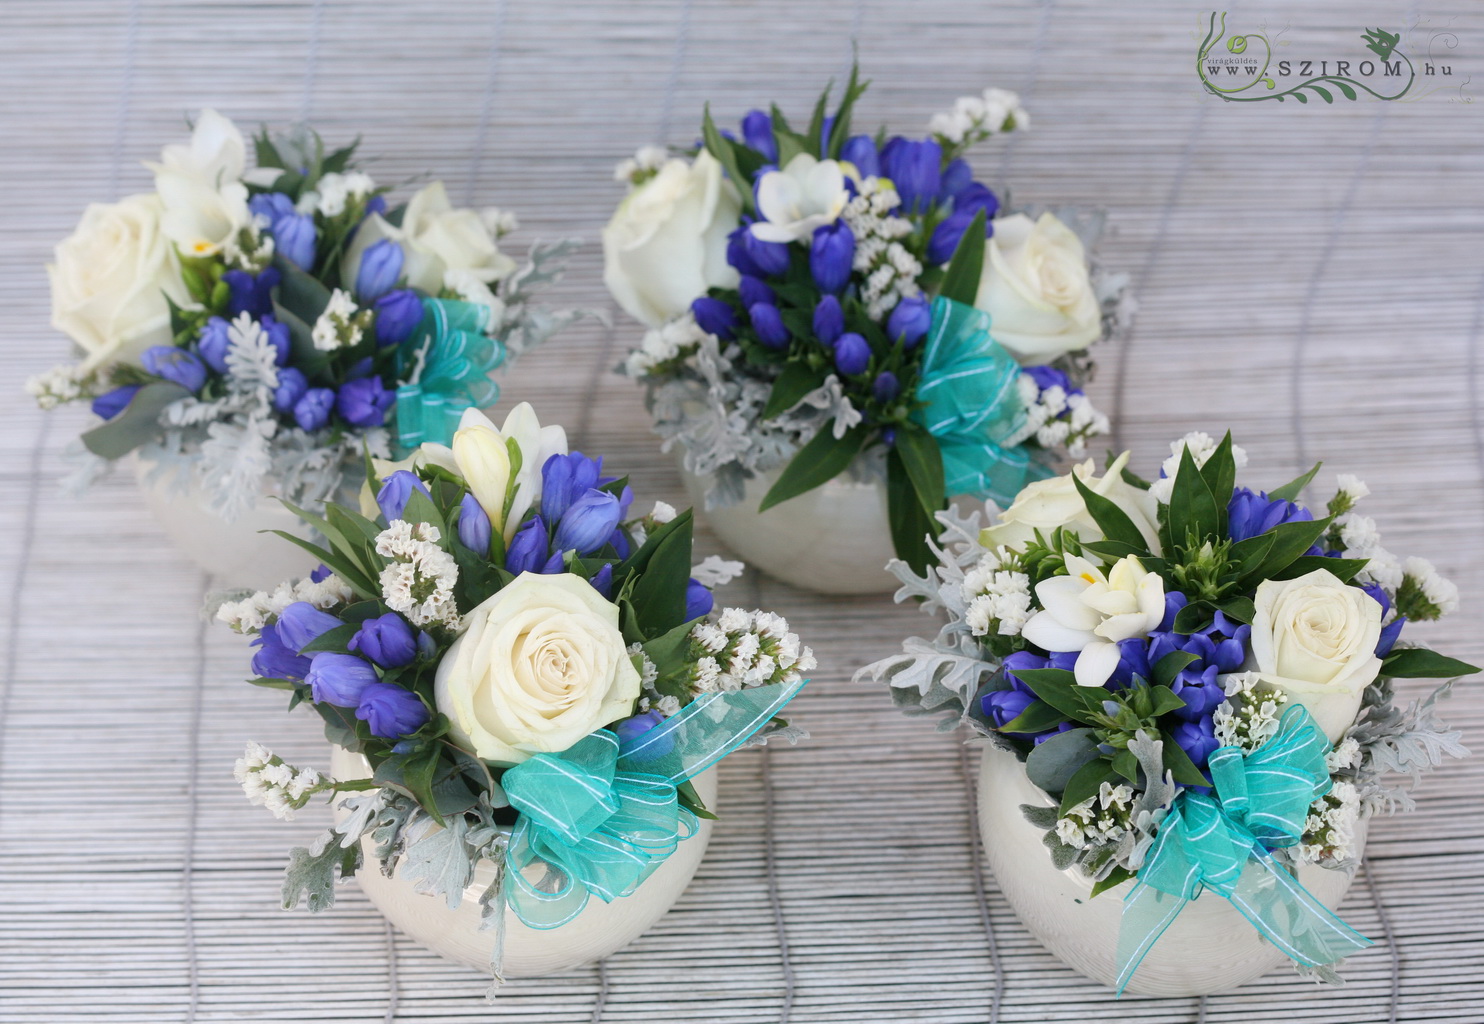 flower delivery Budapest - Small centerpieces with gentianas 1pc (blue), wedding